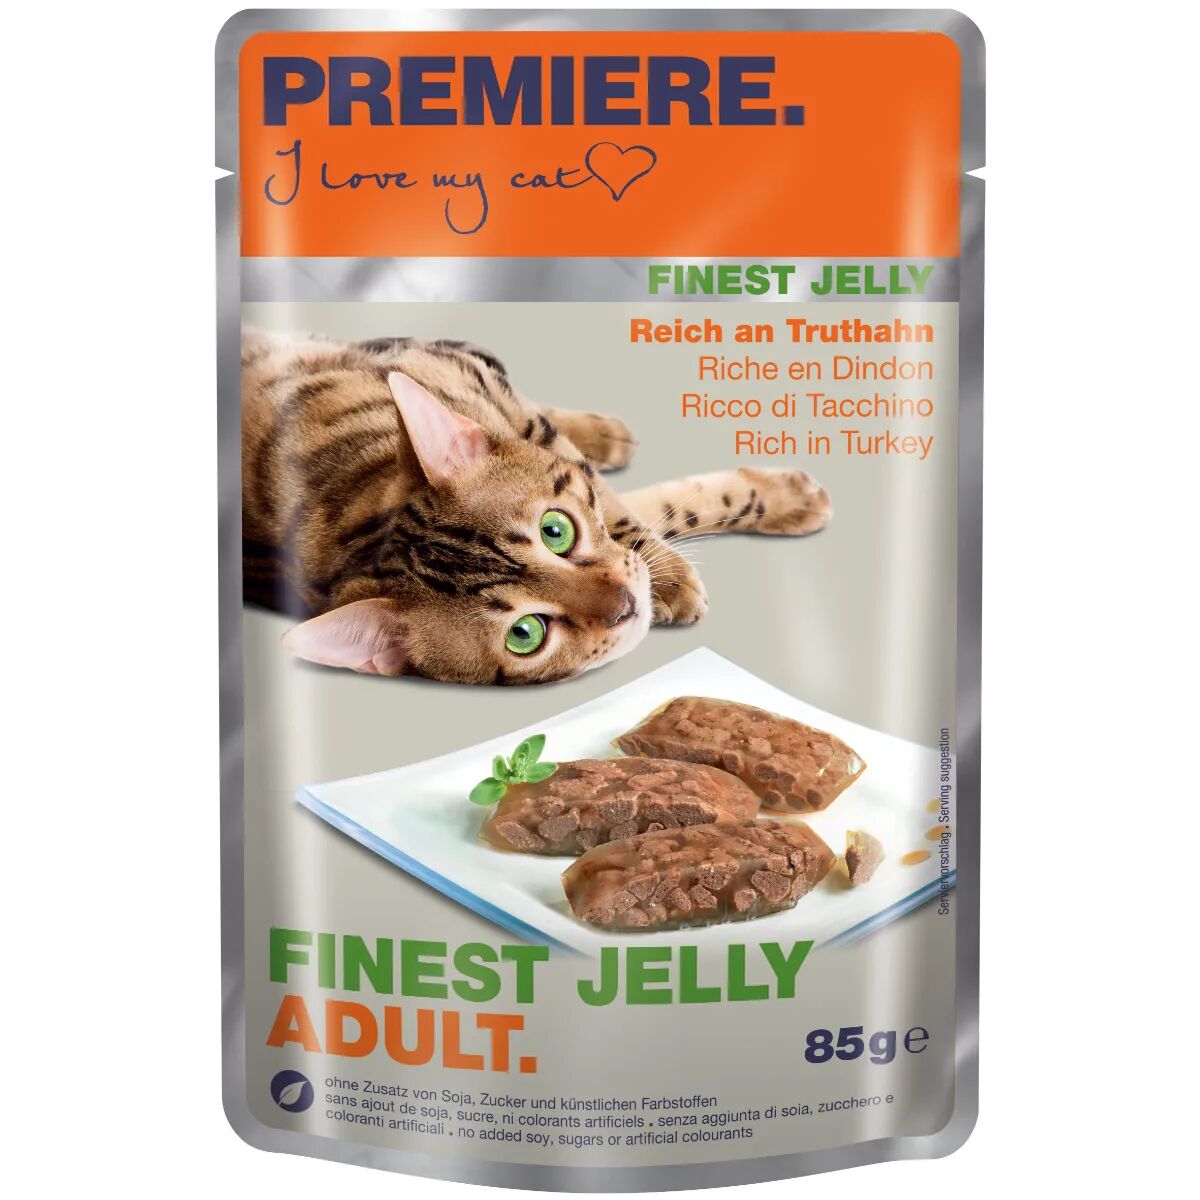 PREMIERE Finest Jelly Cat Busta Multipack 22x85G TACCHINO